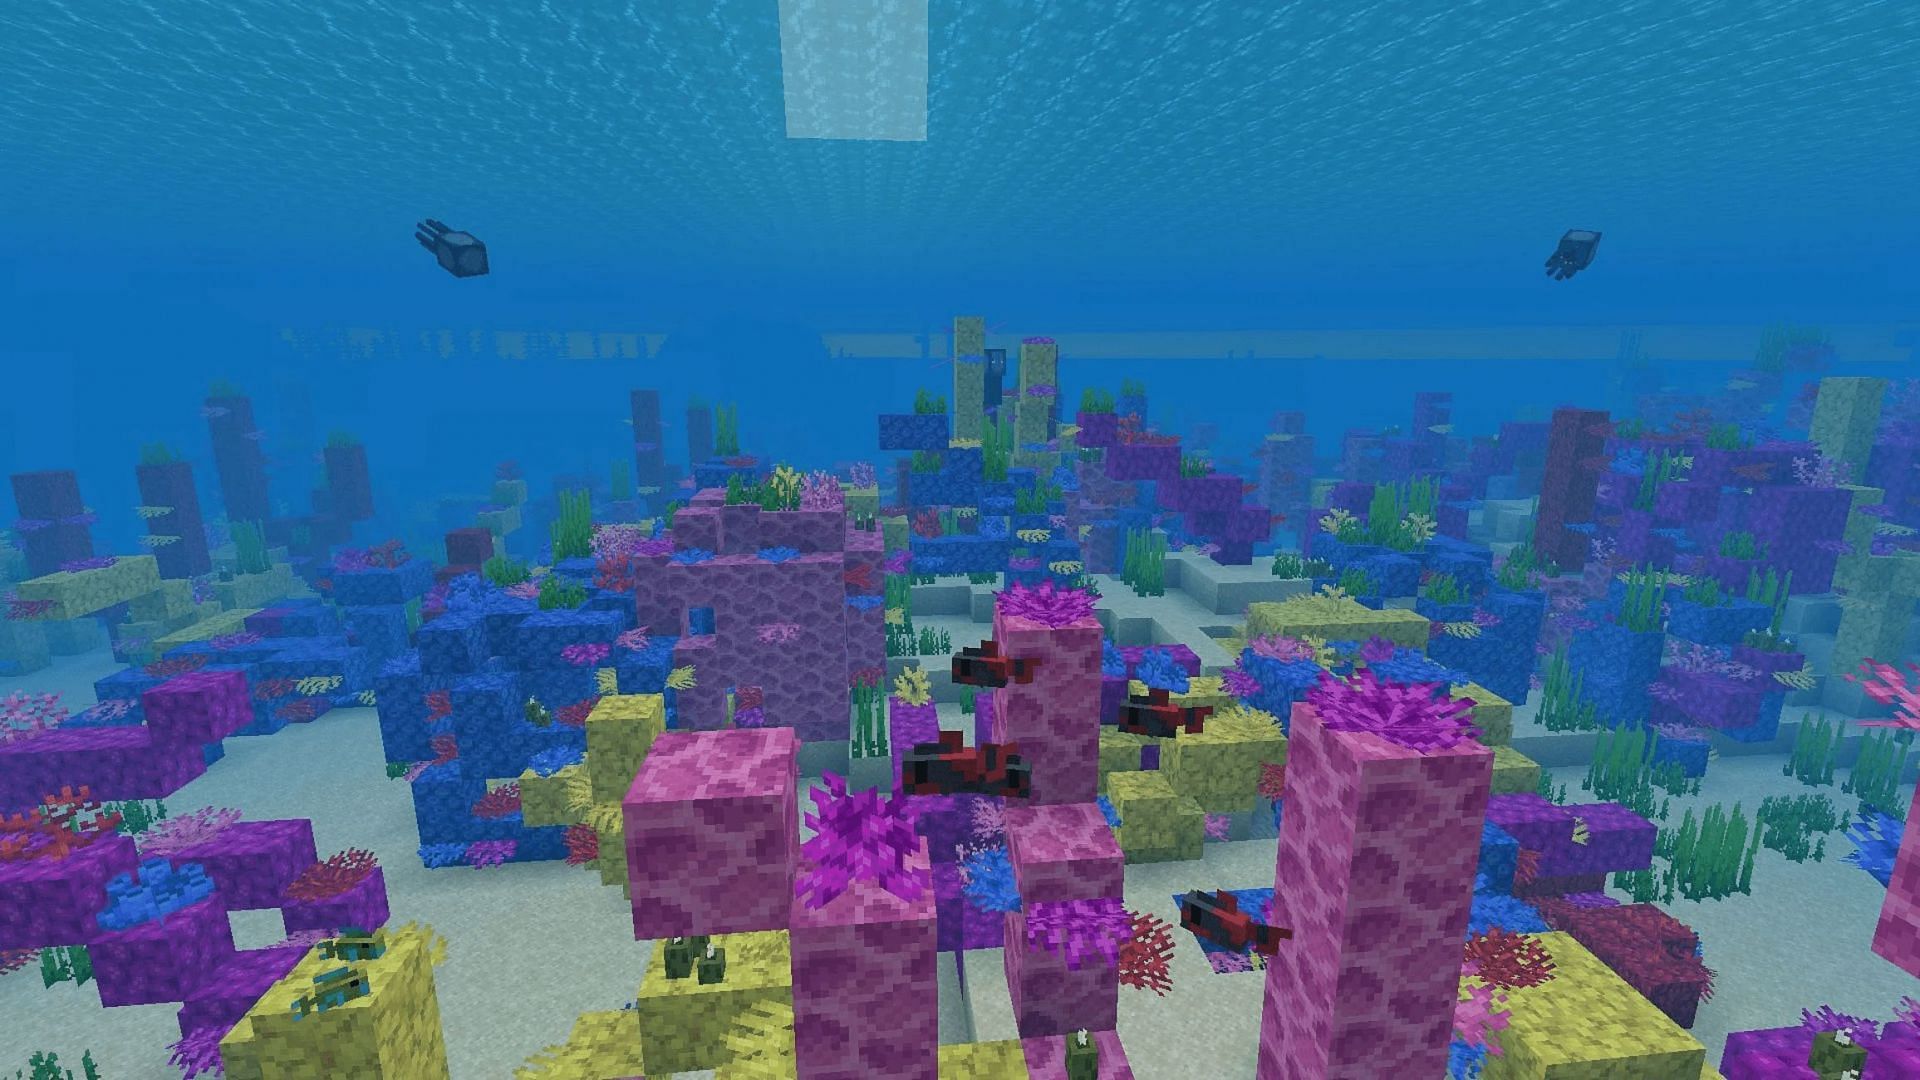 Coral is often found in warm ocean biomes in Minecraft (Image via Mojang)